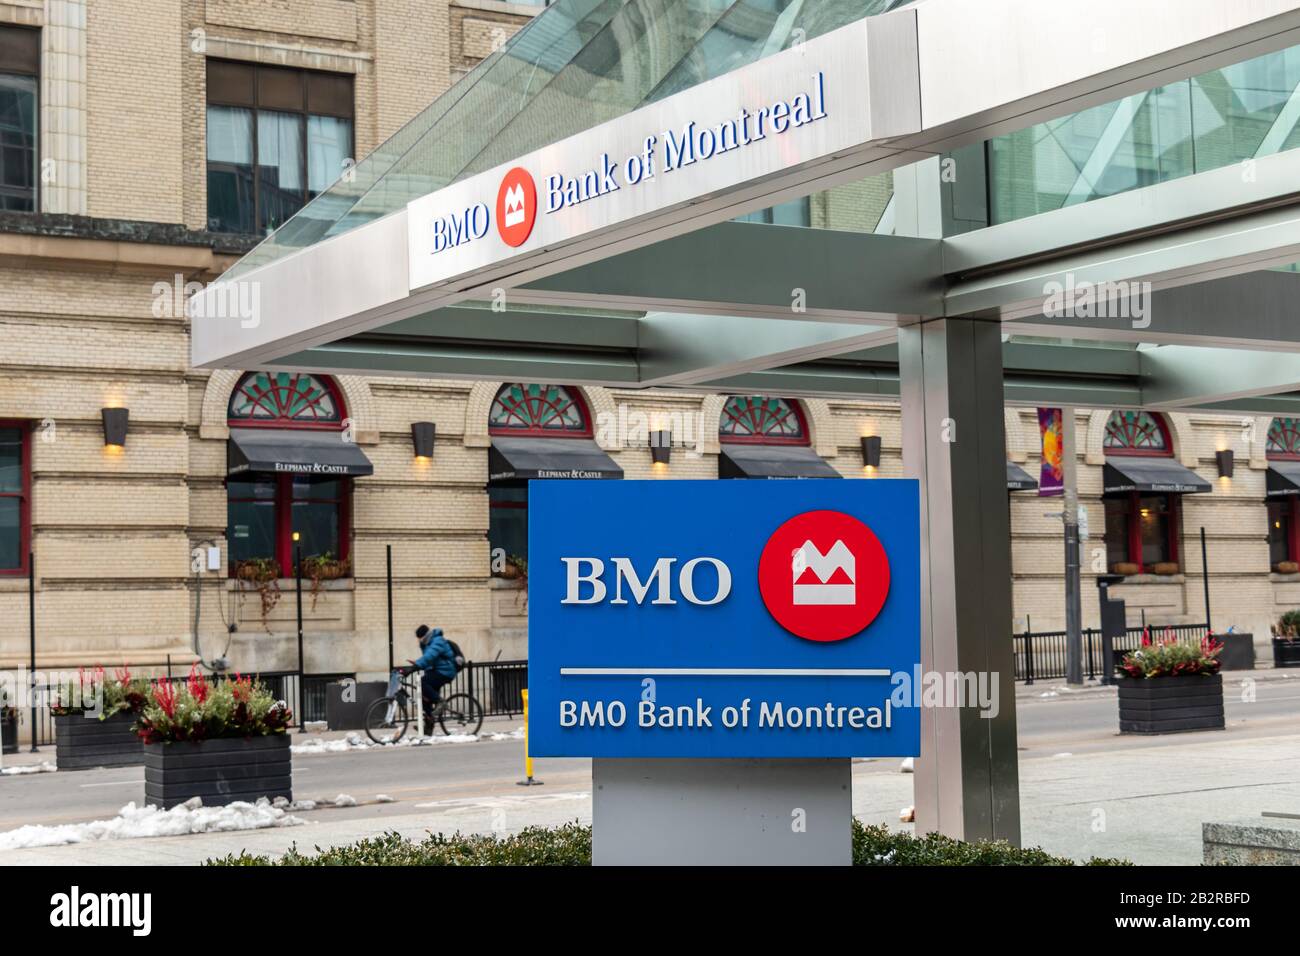 BMO Bank of Montreal signage at the entrance to a bank branch in downtown Toronto. Stock Photo